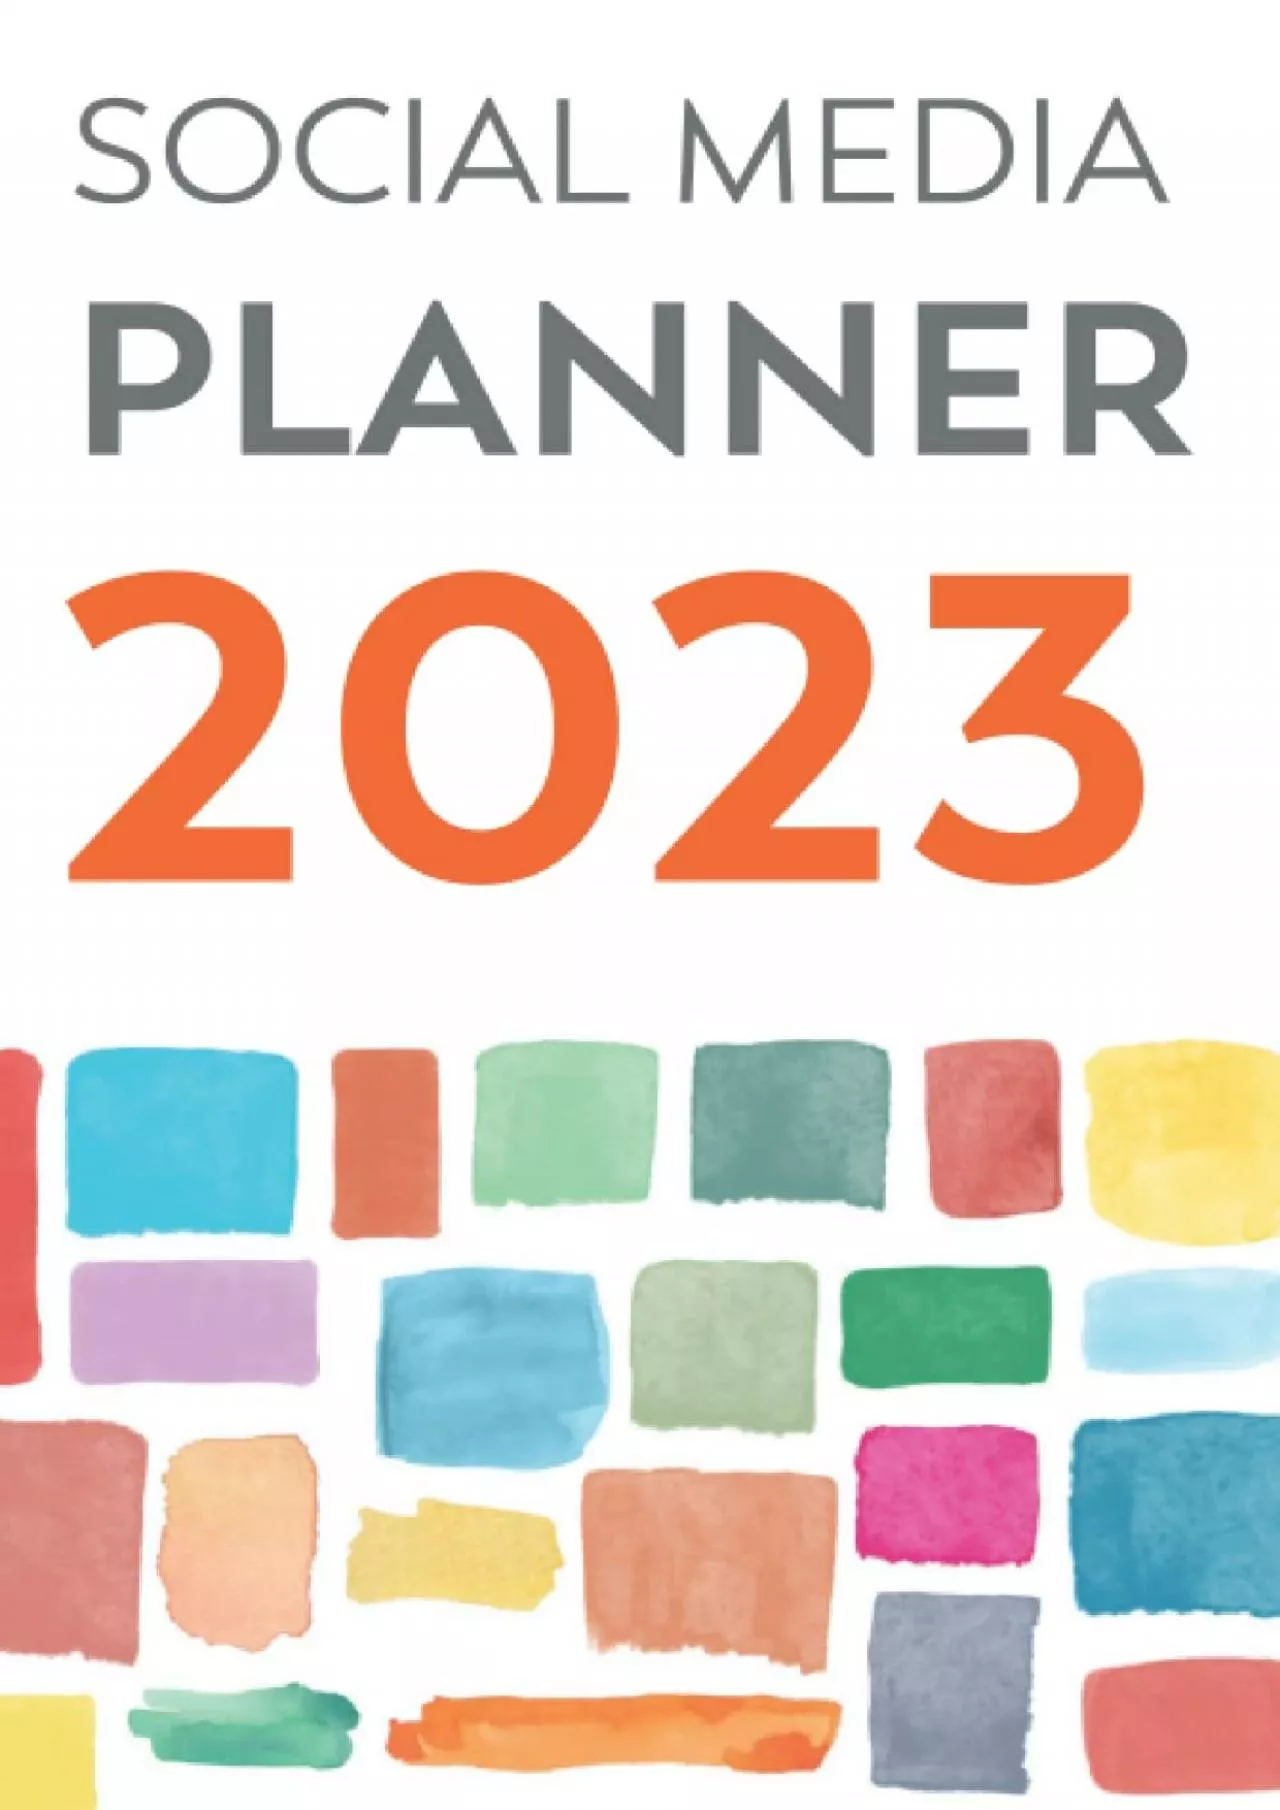 Social Media Planner 2023: Plan Your Social Media Marketing Posting Schedule and Content